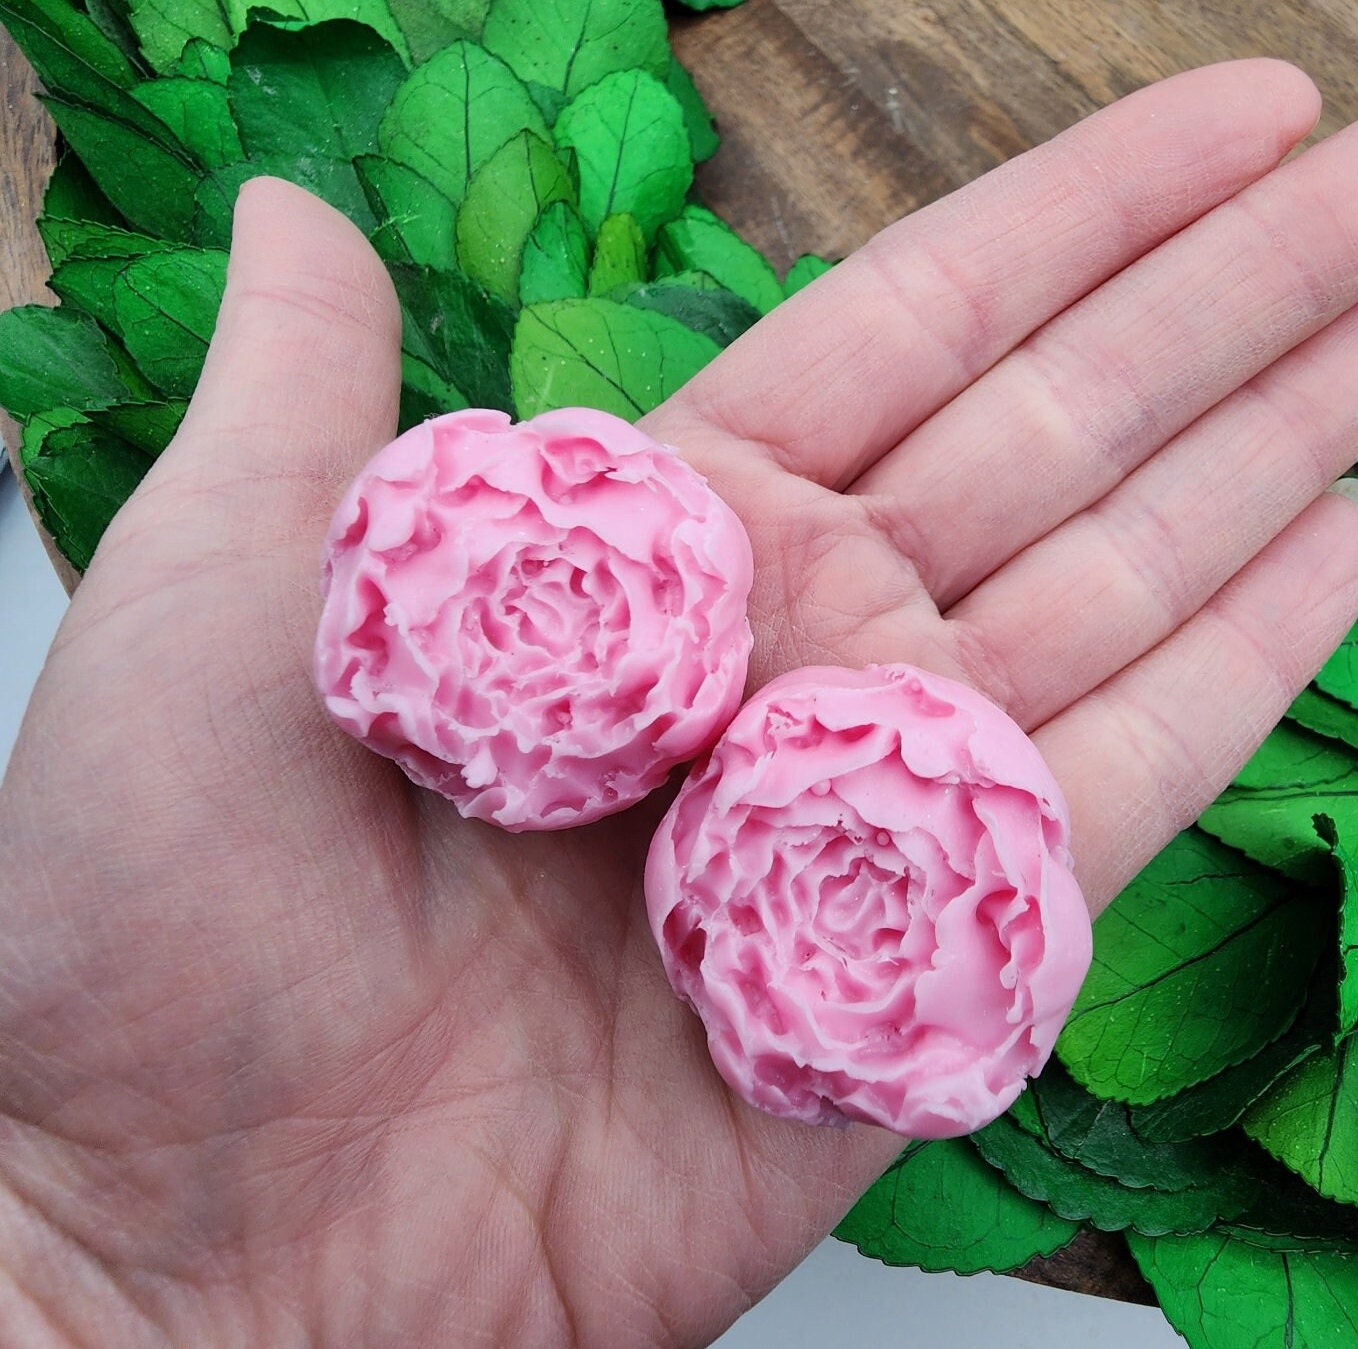 Bridal shower soap - peony soap - flower soap - soap favors - baby in bloom favors - wedding favor soap - pink peony - peonies soap